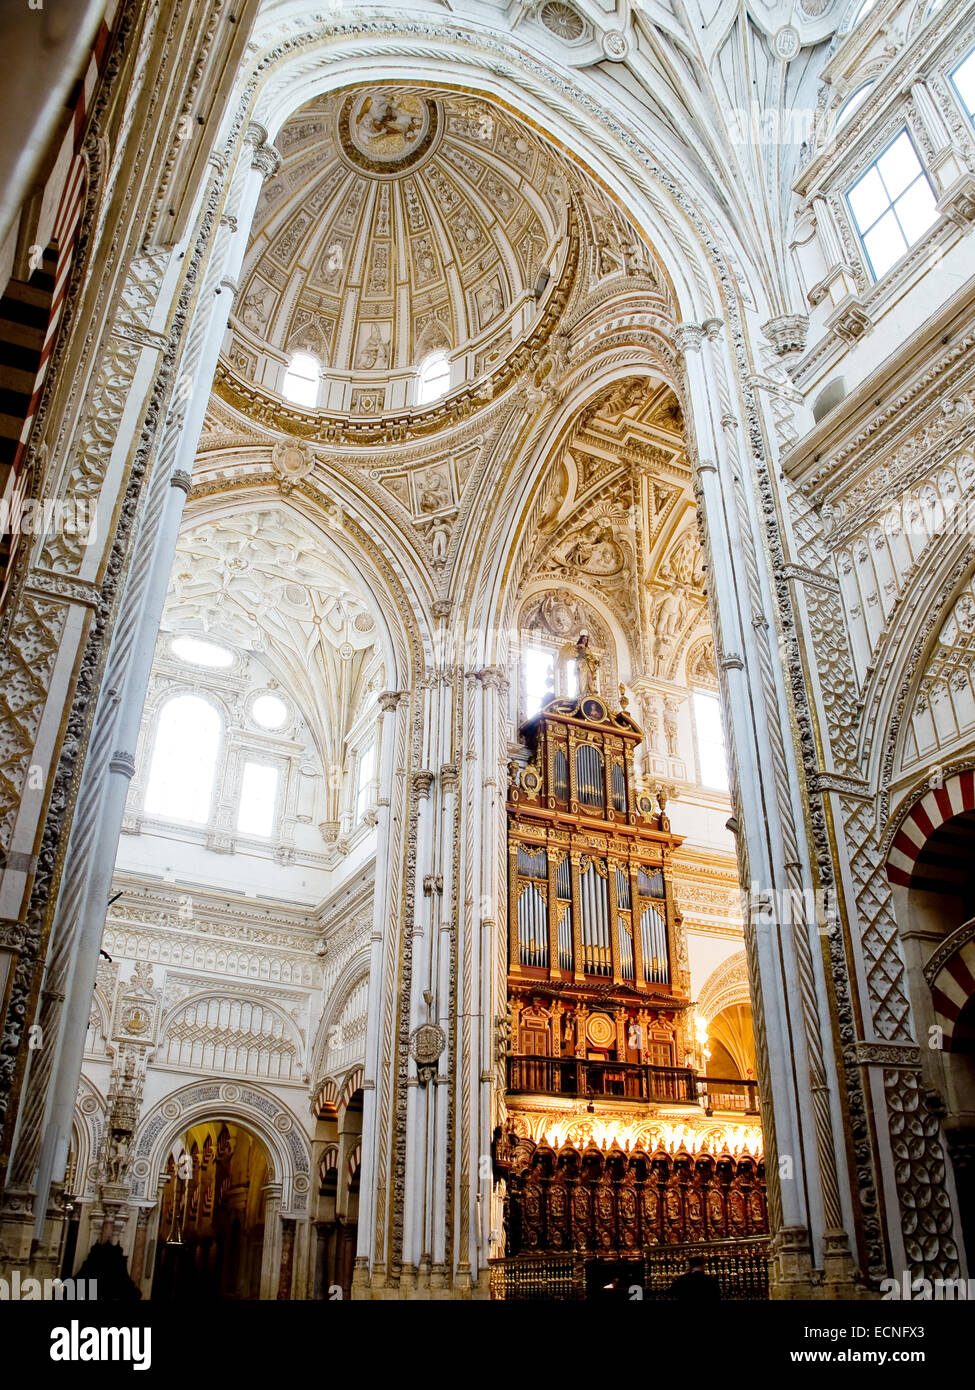 Aisle, nave and organ of Cathedral Mosque, Mezquita de Cordoba. Andalusia, Spain. Stock Photo